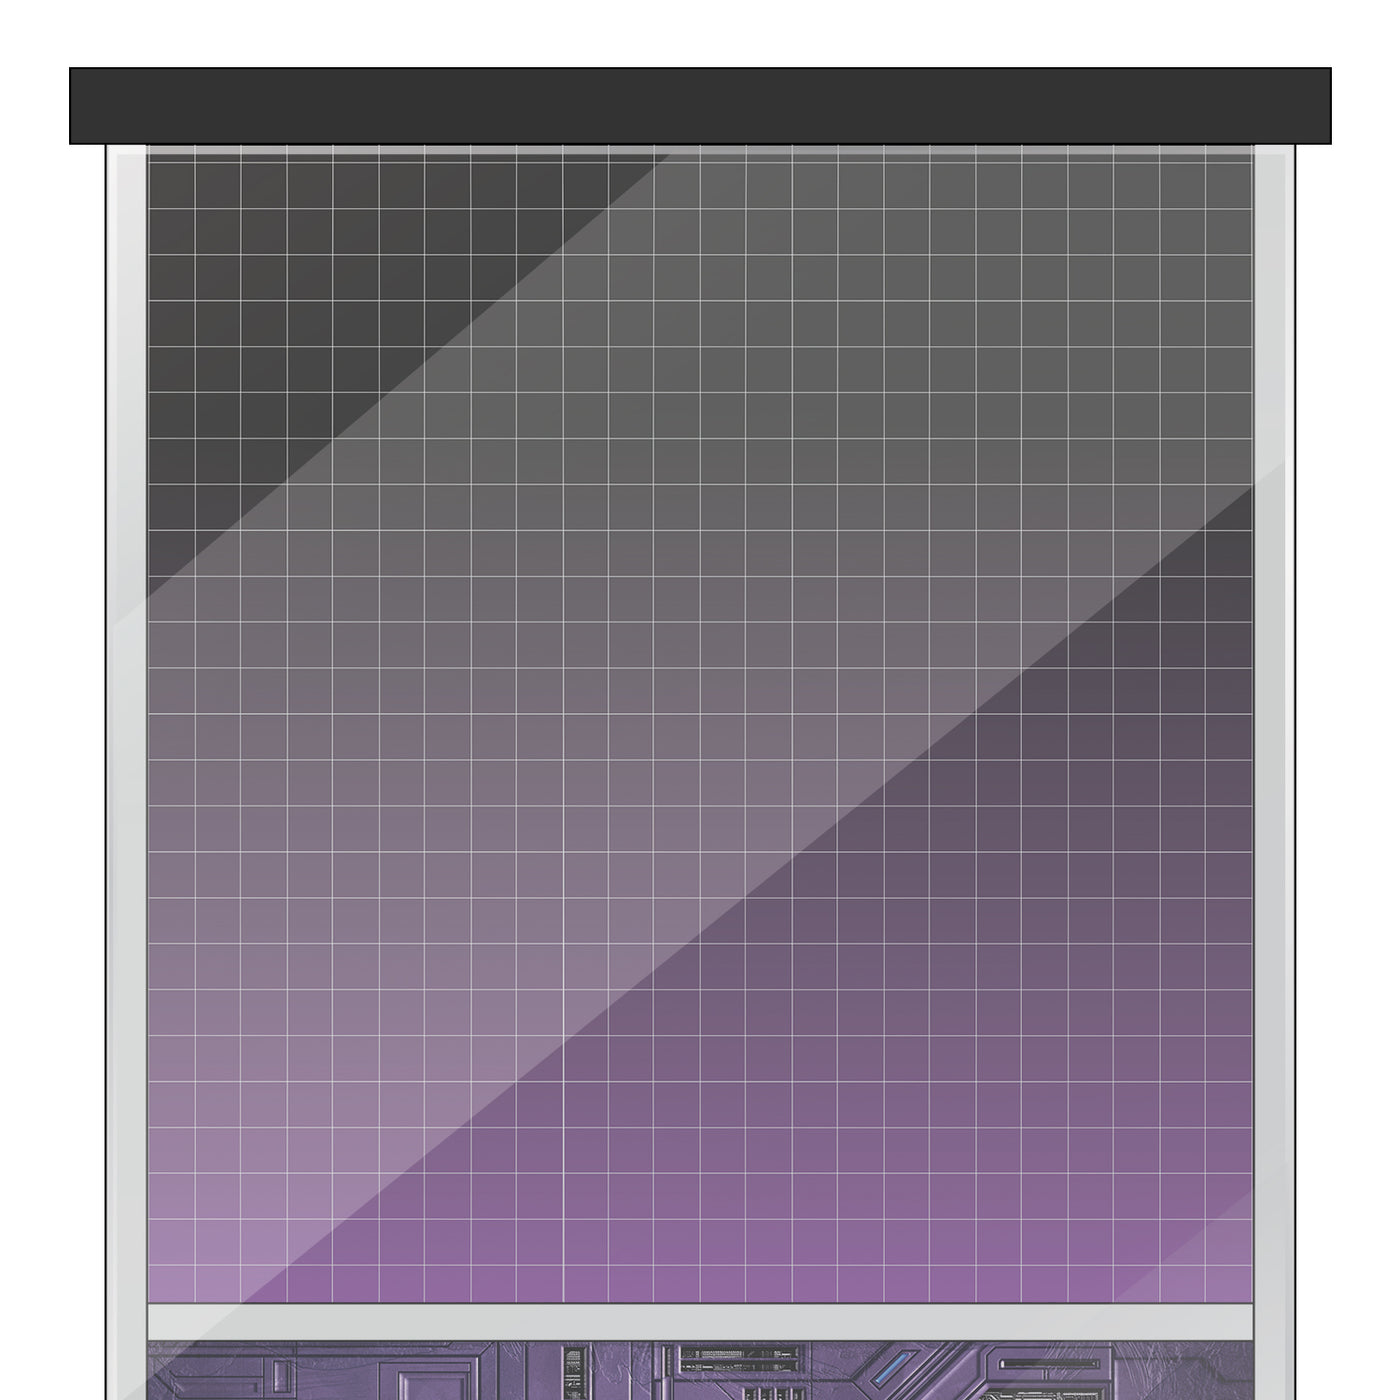 Transformers Grid Themed 15 x 15 Background Decals for IKEA Detolf Displays